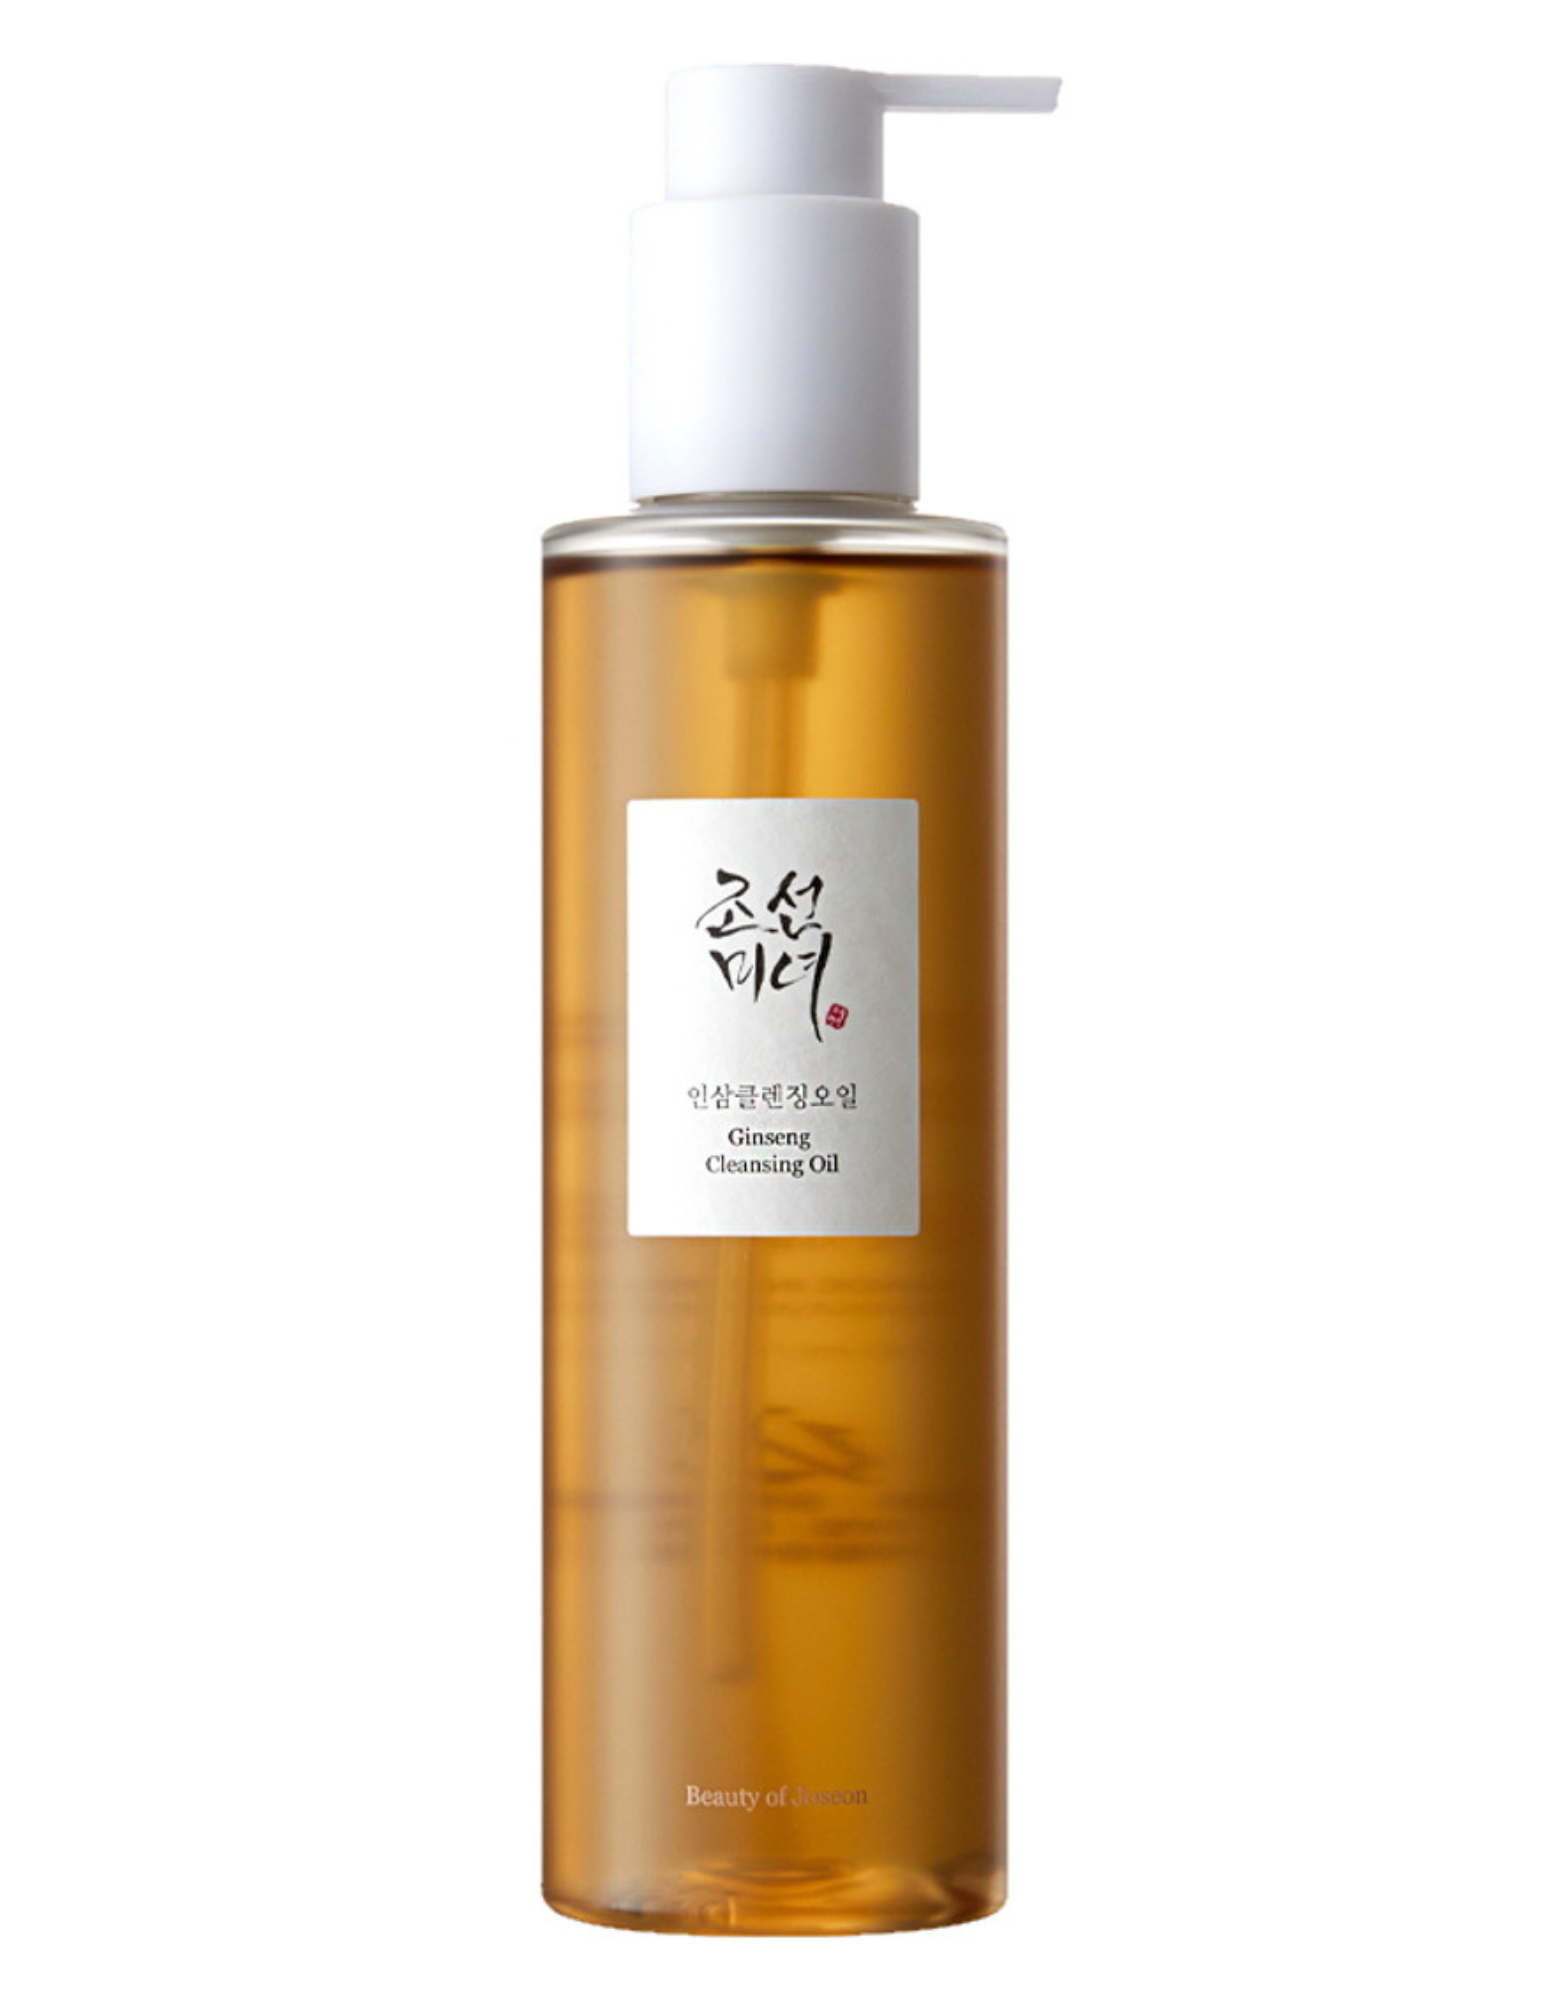 Ginseng Cleansing Oil 210ml - Aceite Limpiador